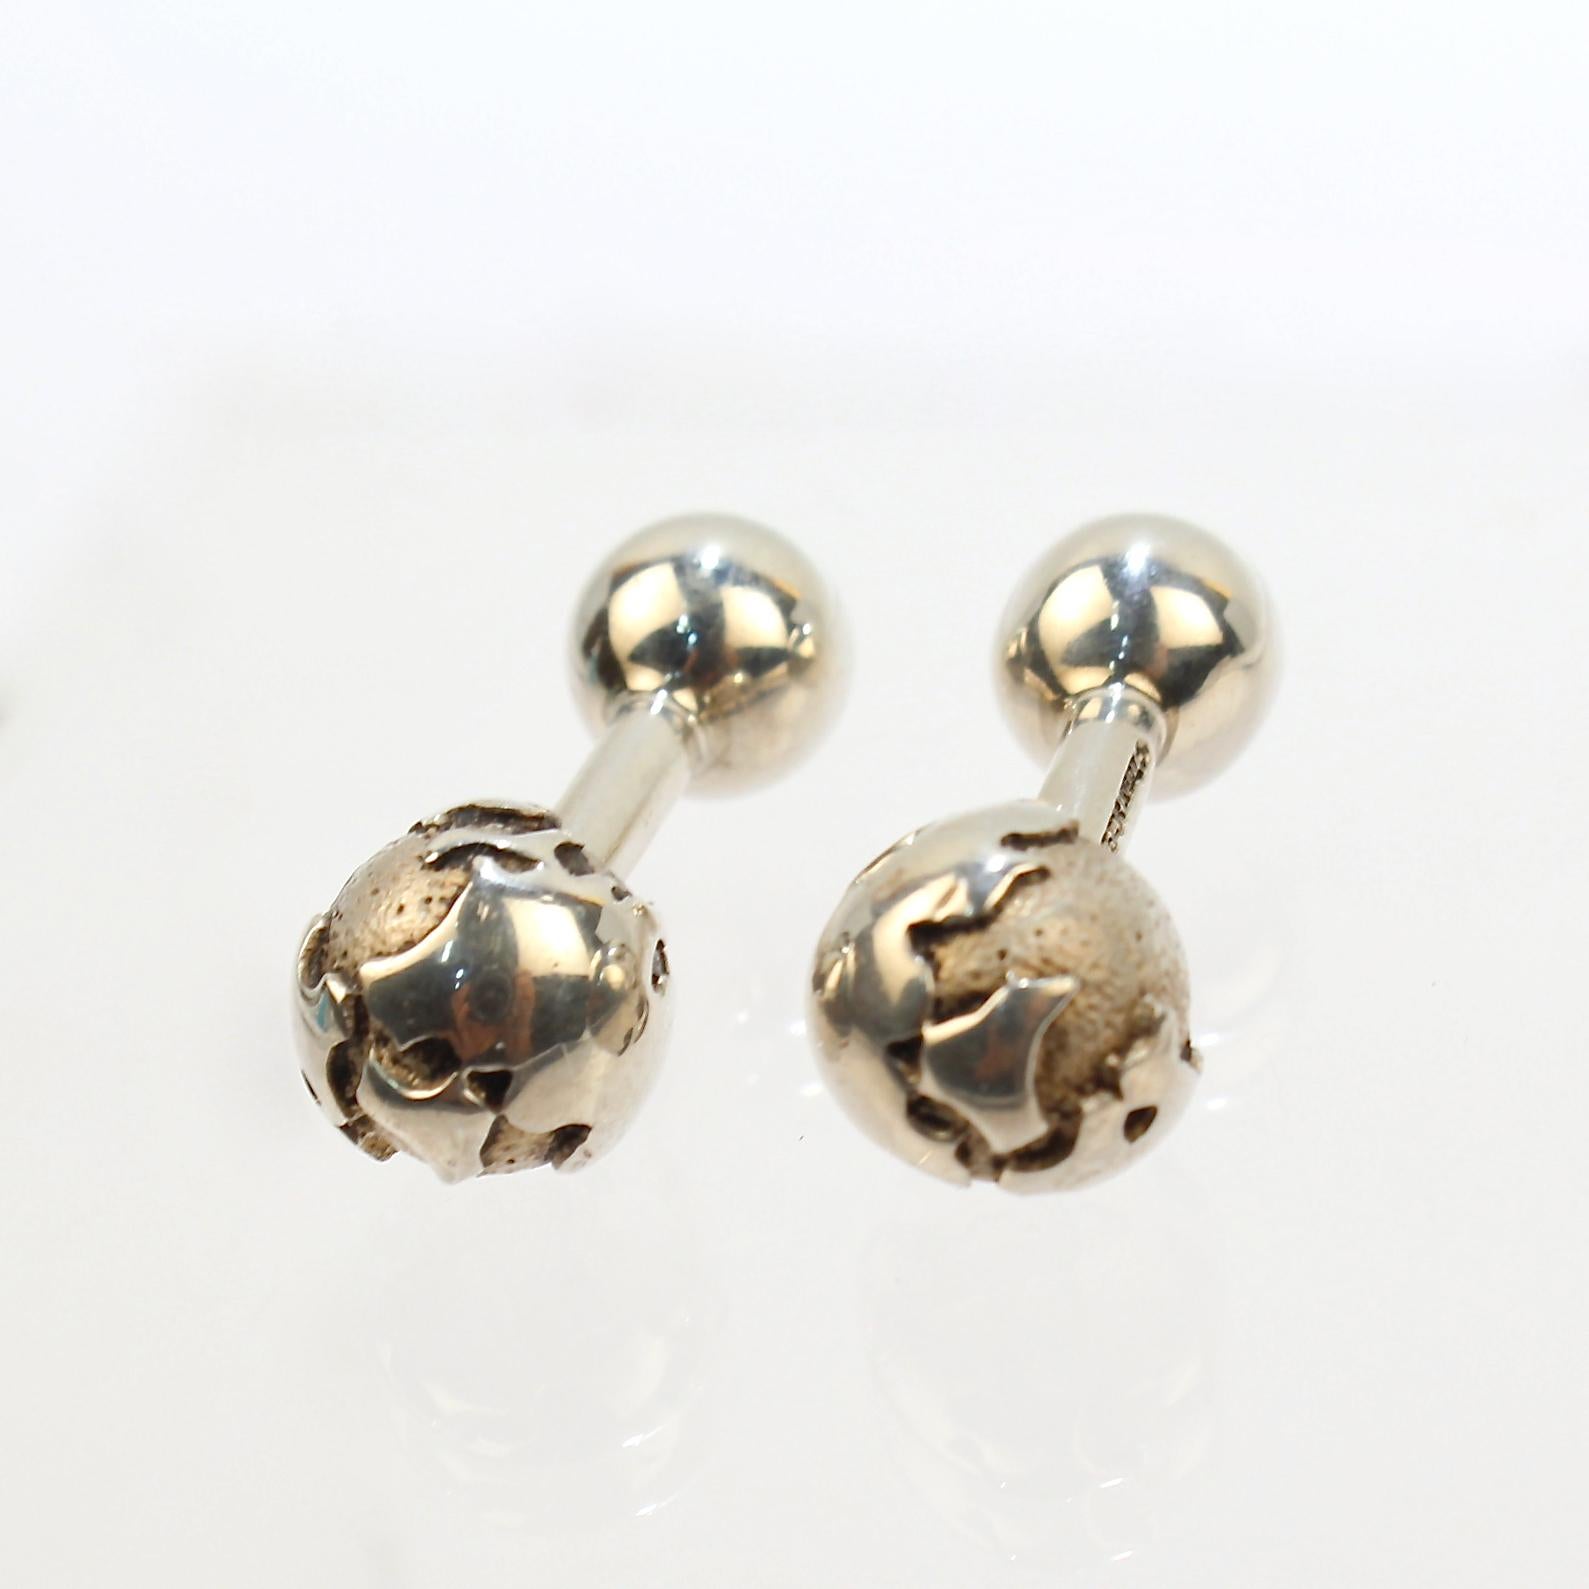 A fine pair of Tiffany & Co. cufflinks.

These terrific barbell cufflinks have a globe on one end of each link.

Exciting Tiffany design!

Date:
20th Century

Overall Condition:
They are in overall good, as-pictured, used estate condition with some